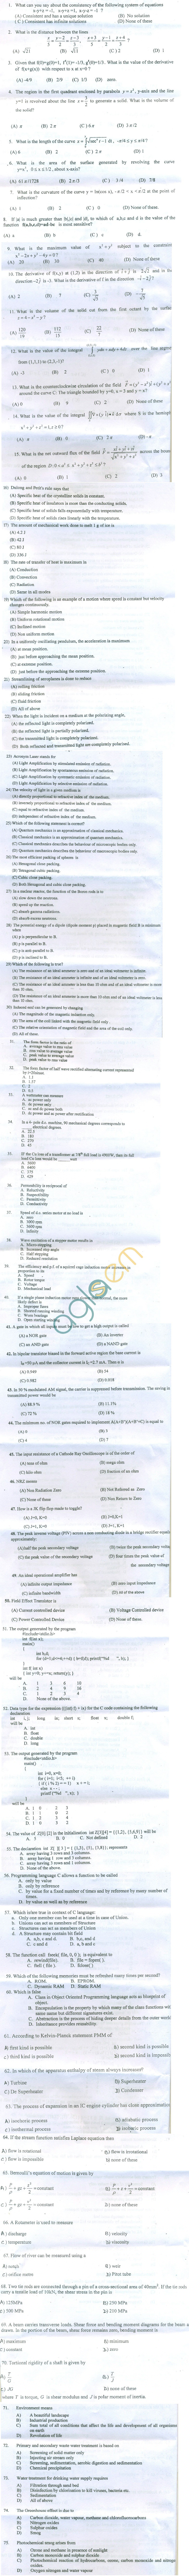 PU LEET 2013 Question Paper with Answers